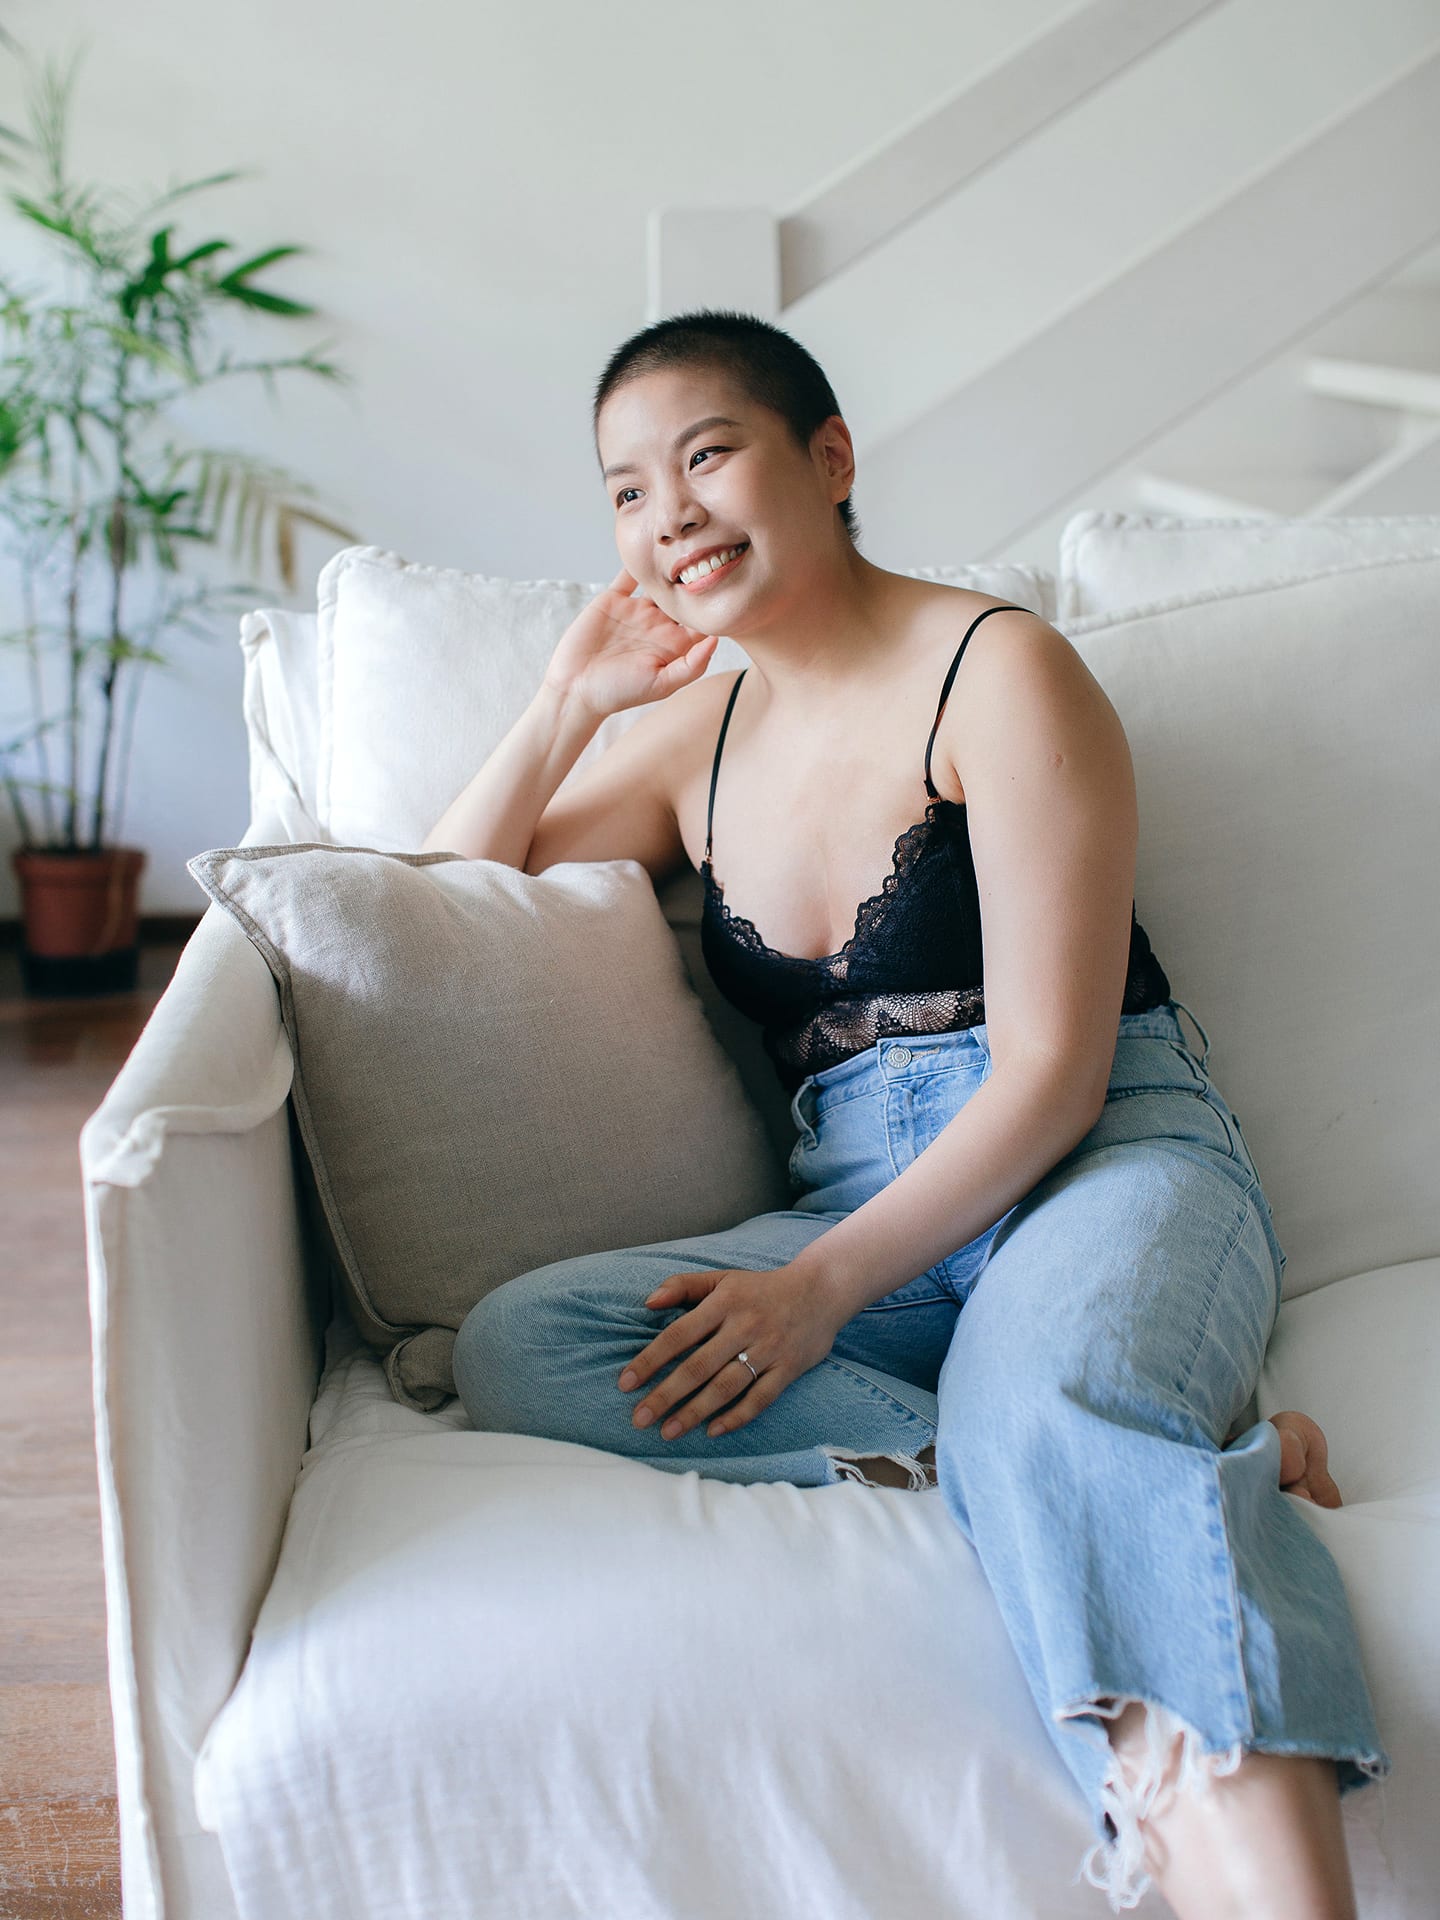 This Singapore lingerie maker designs stylish bras for breast